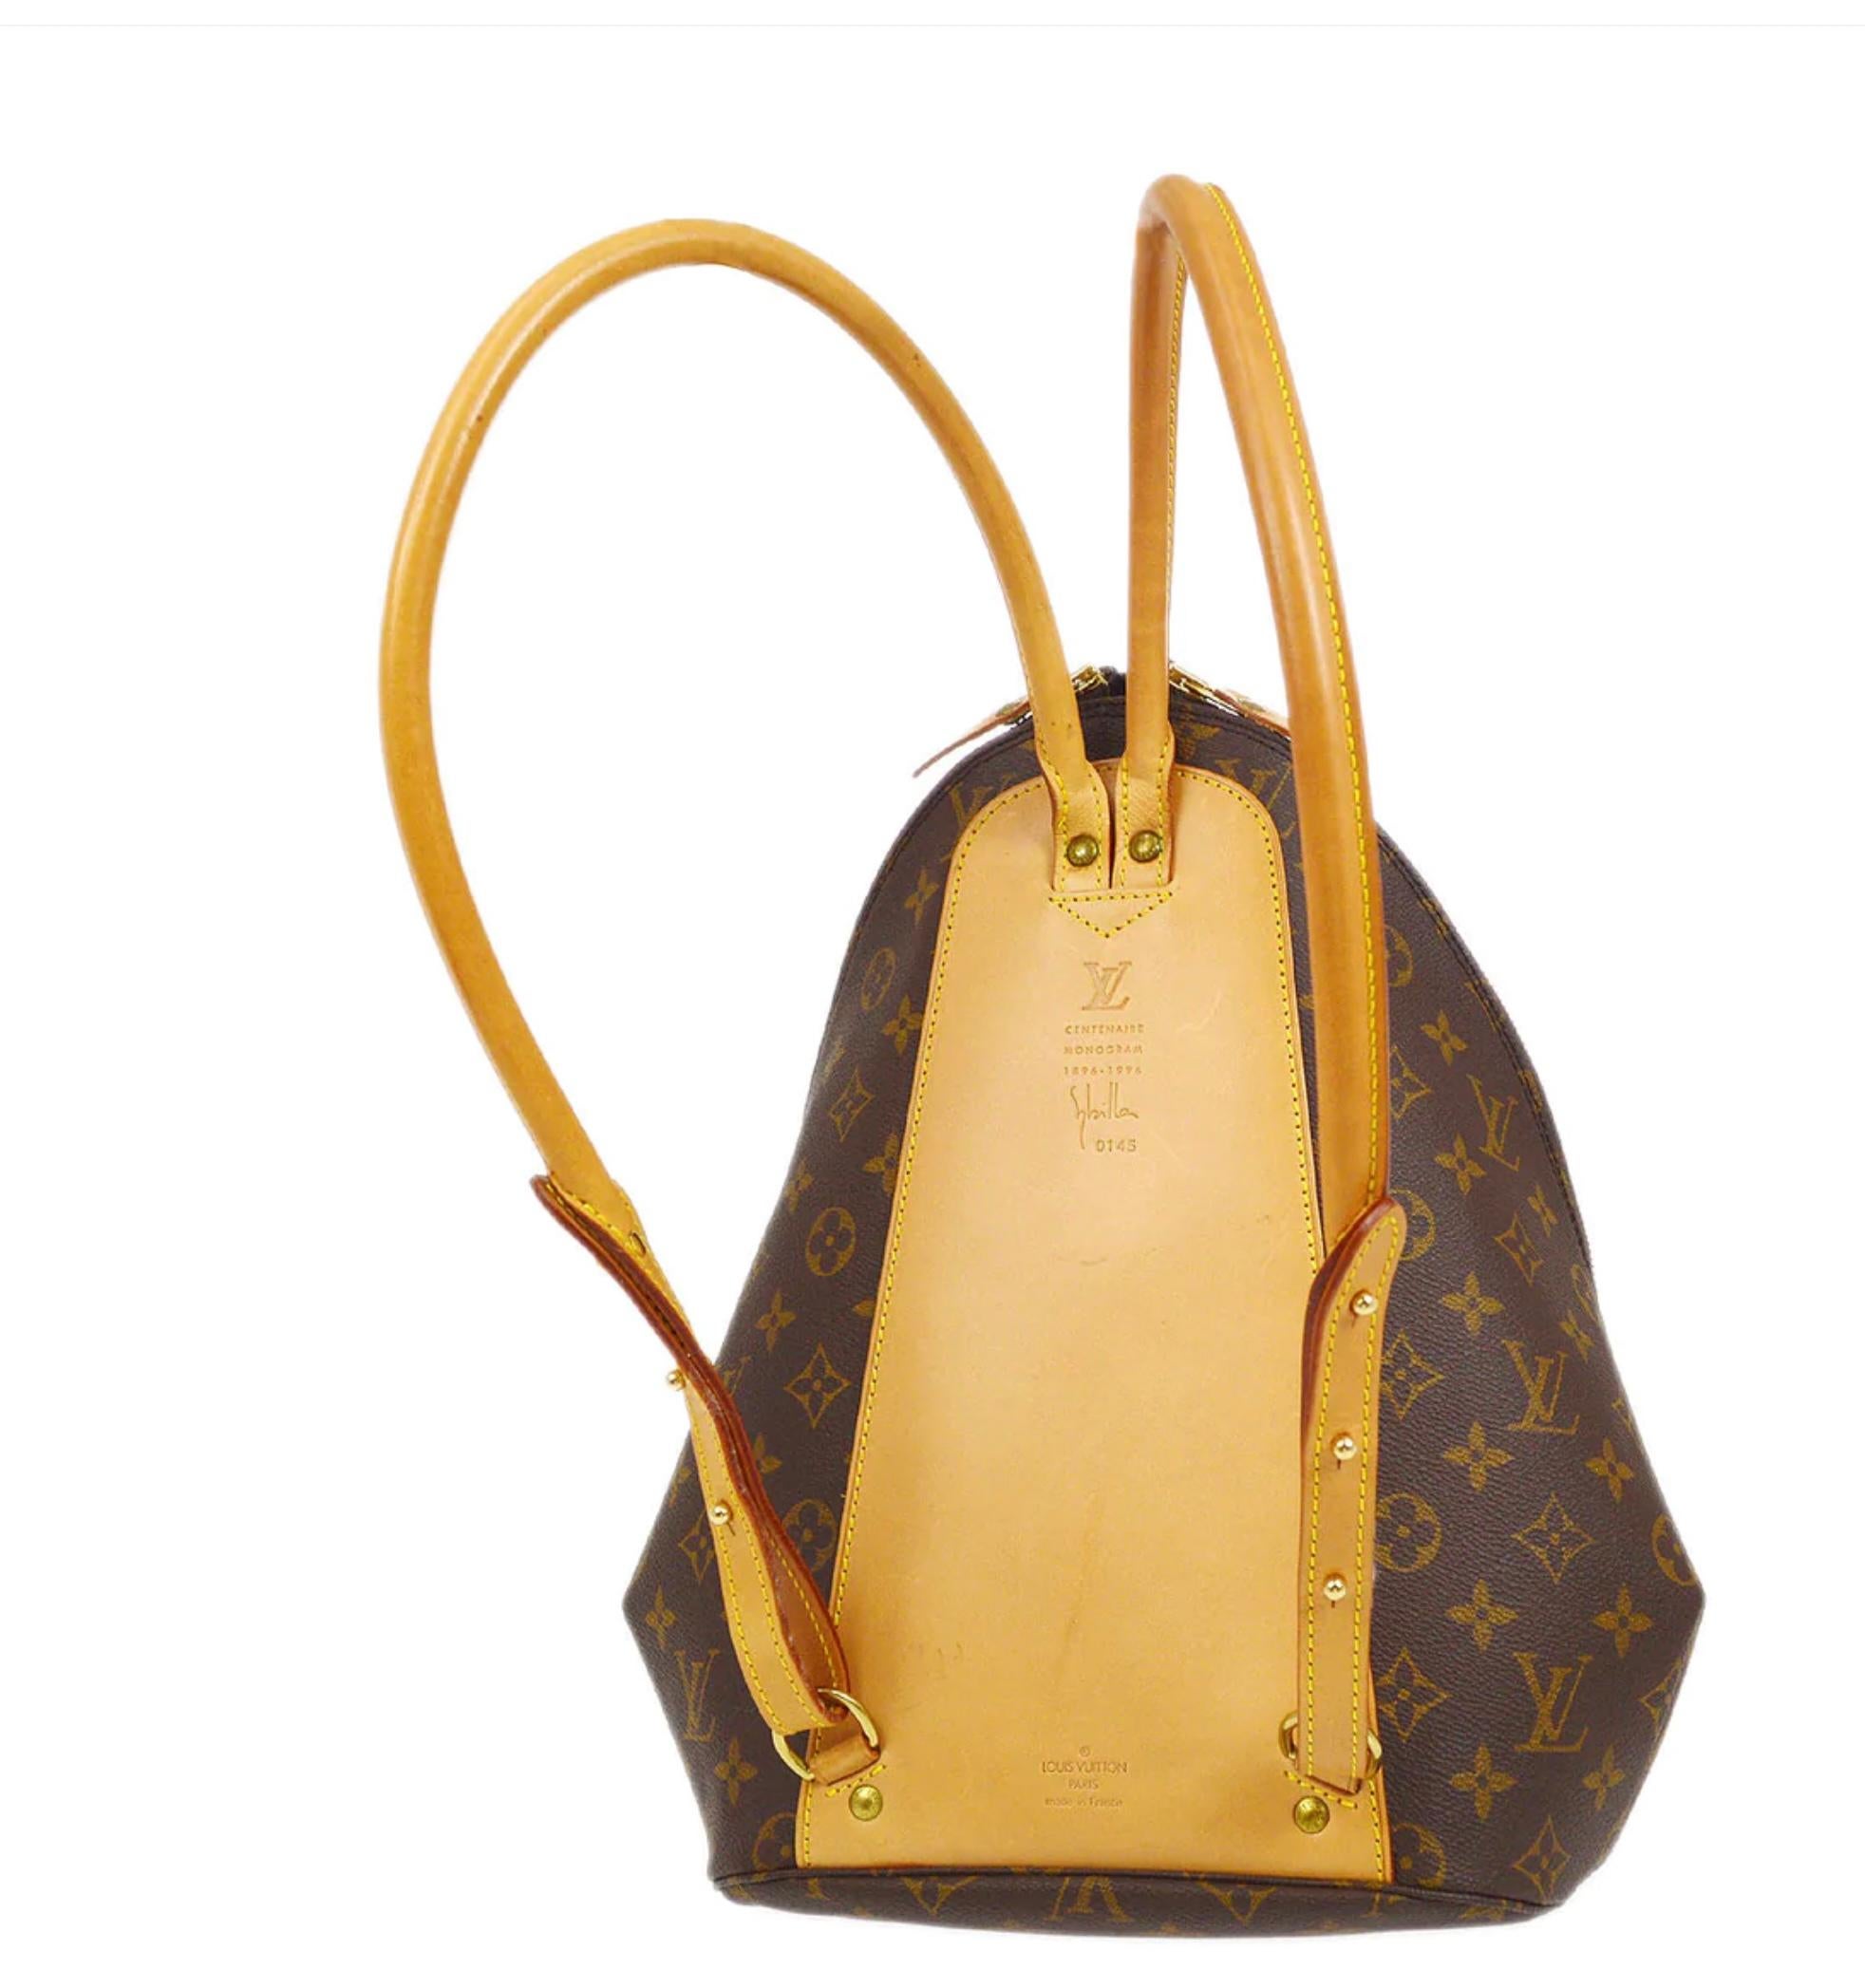 Pre-Owned Vintage Condition
From 1996 Collection
Monogram Canvas
Leather Trim
Gold Hardware
Measures W 9.1 x H 13.8 x D 3.9 